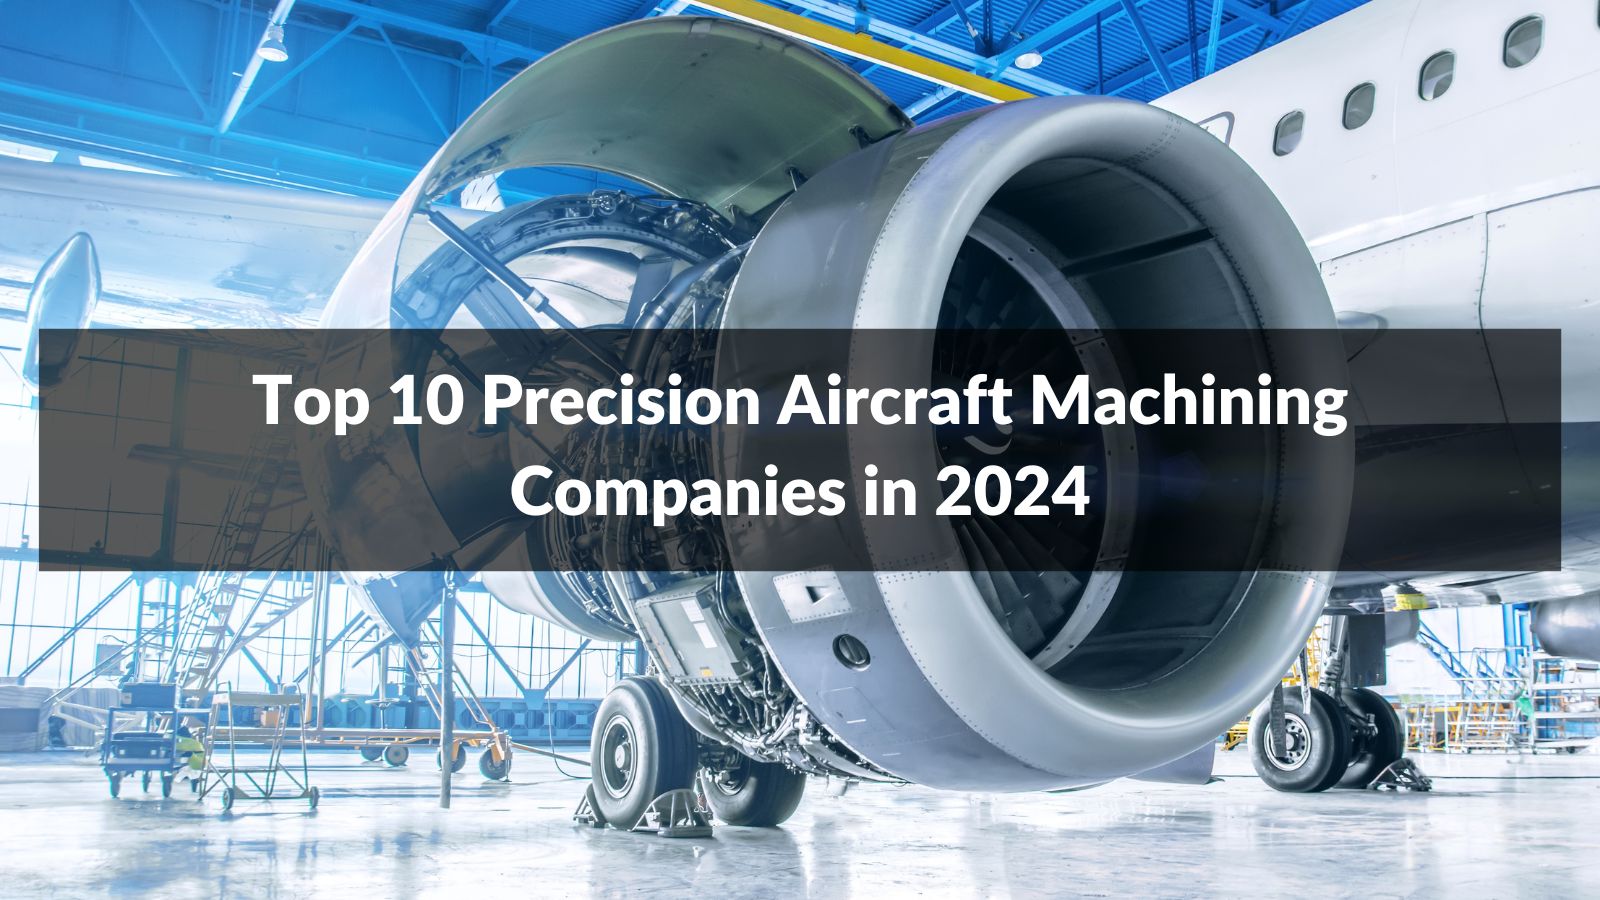 Top 10 Precision Aircraft Machining Companies in 2024